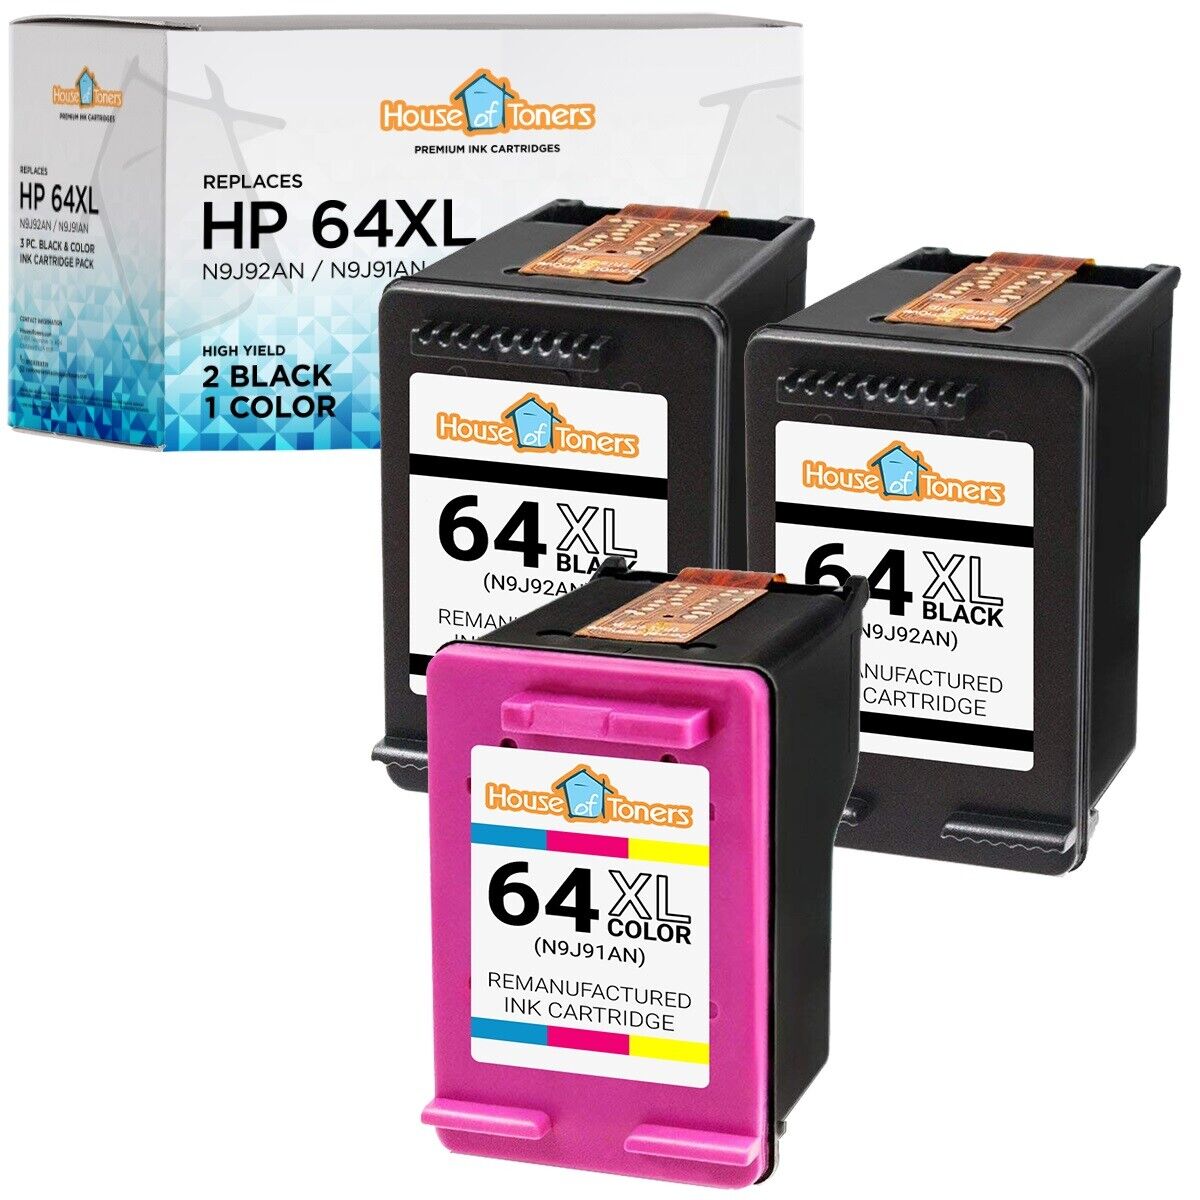 3PK for HP 64XL for ENVY Photo 6263 7585 7130 7120 6252 6220 6222